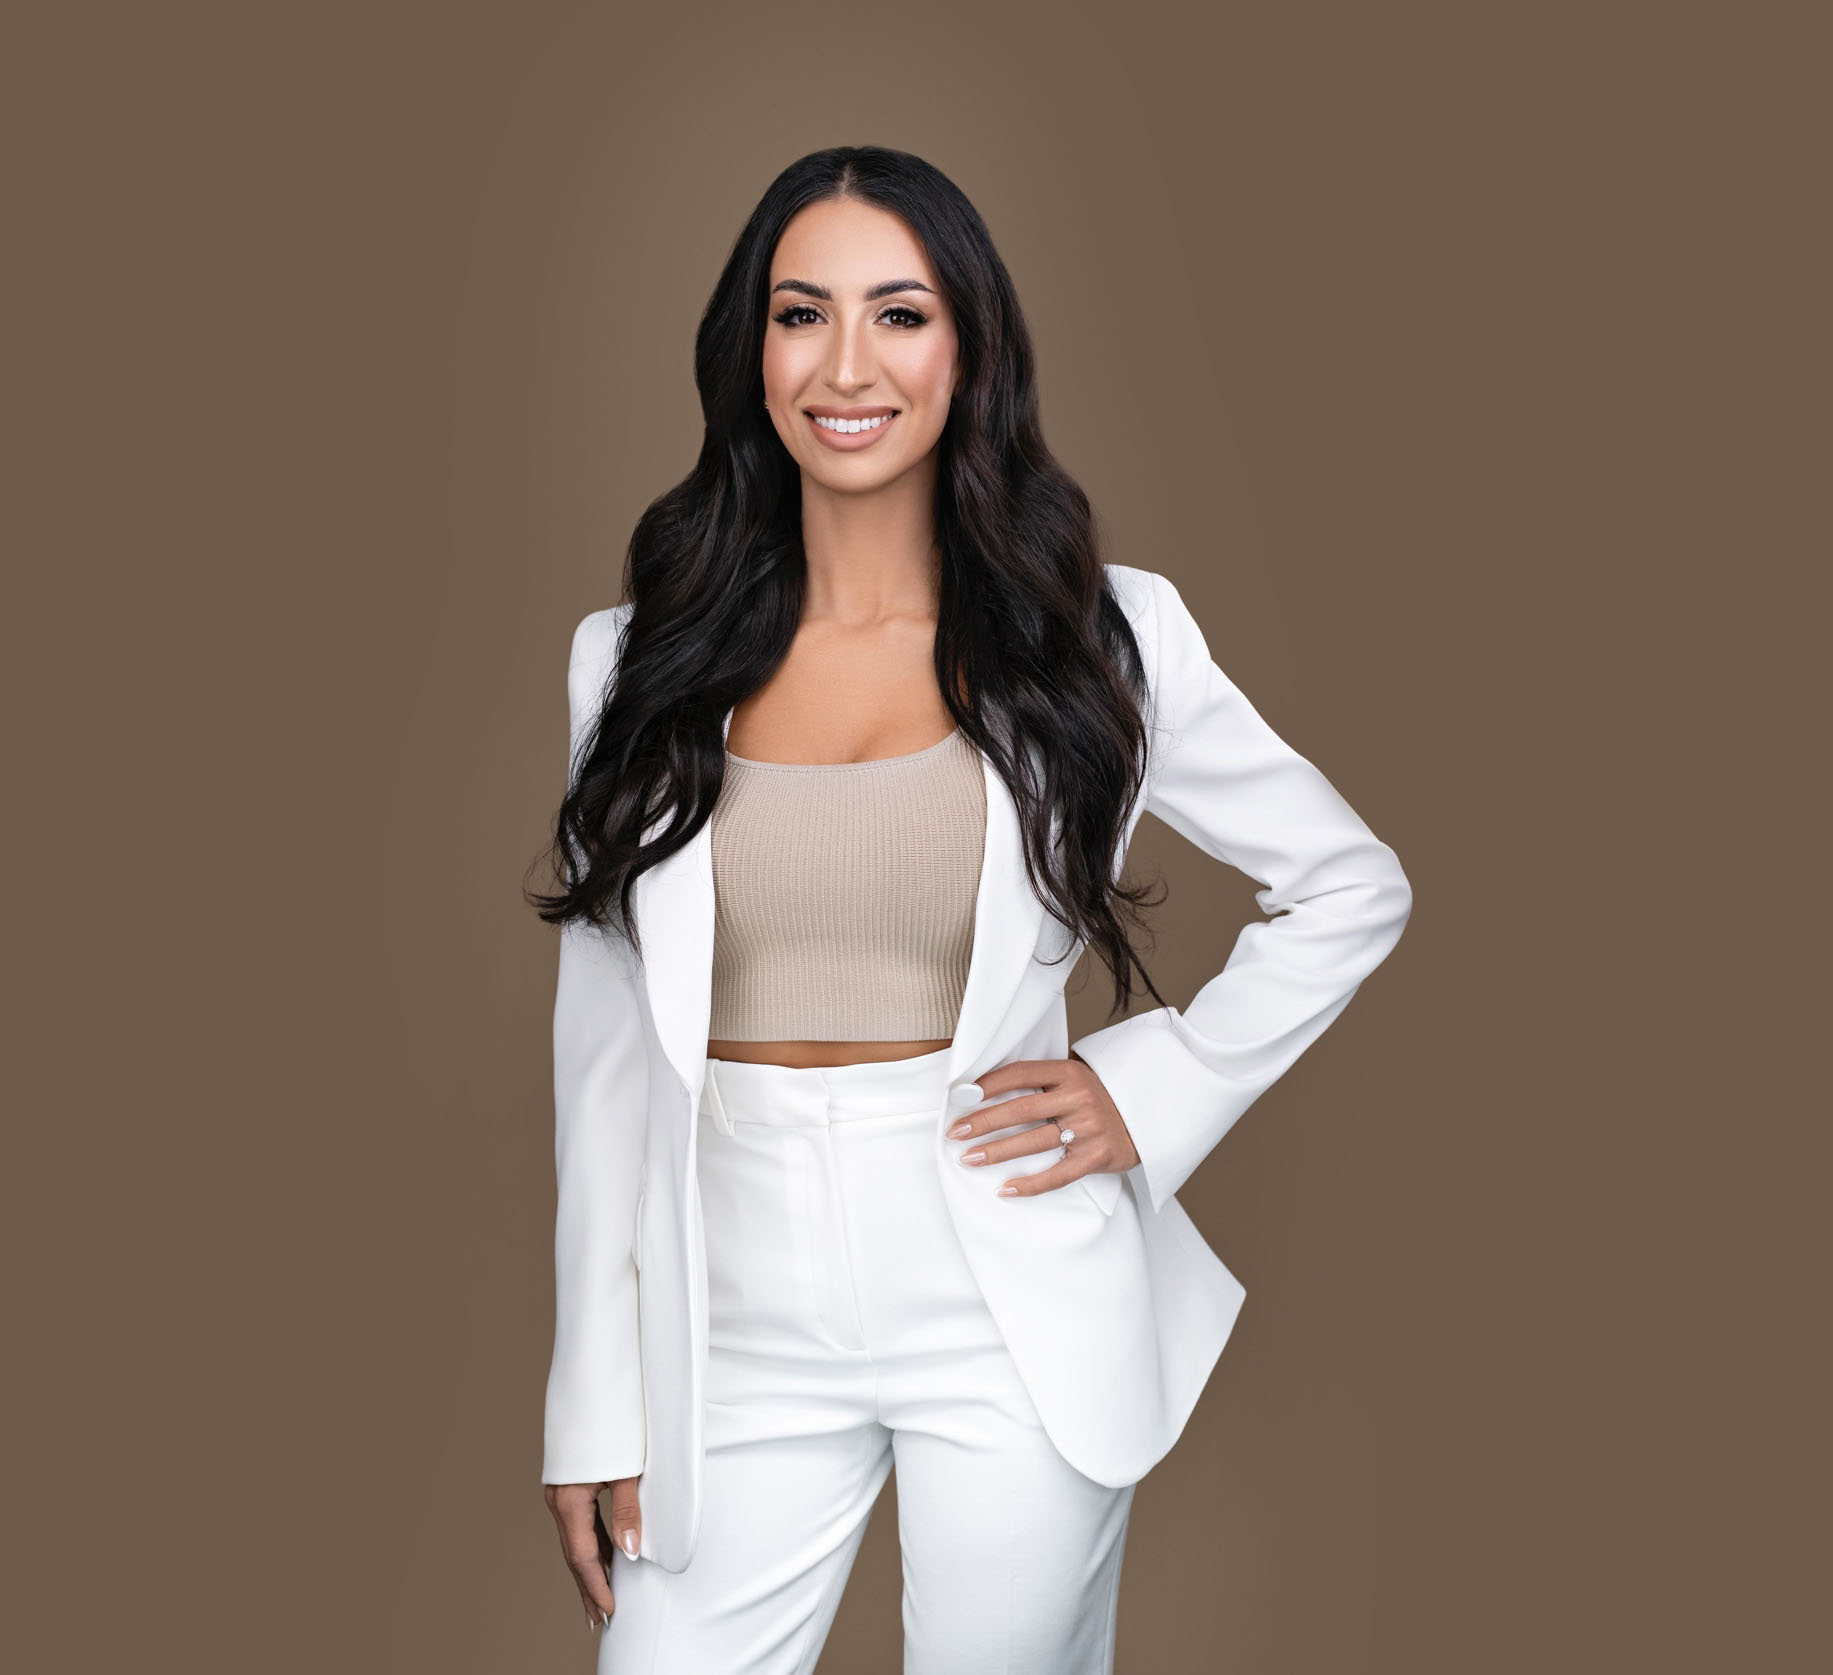 Beauty by Maria V - Maria Santurbano Headshot white suit on brown background